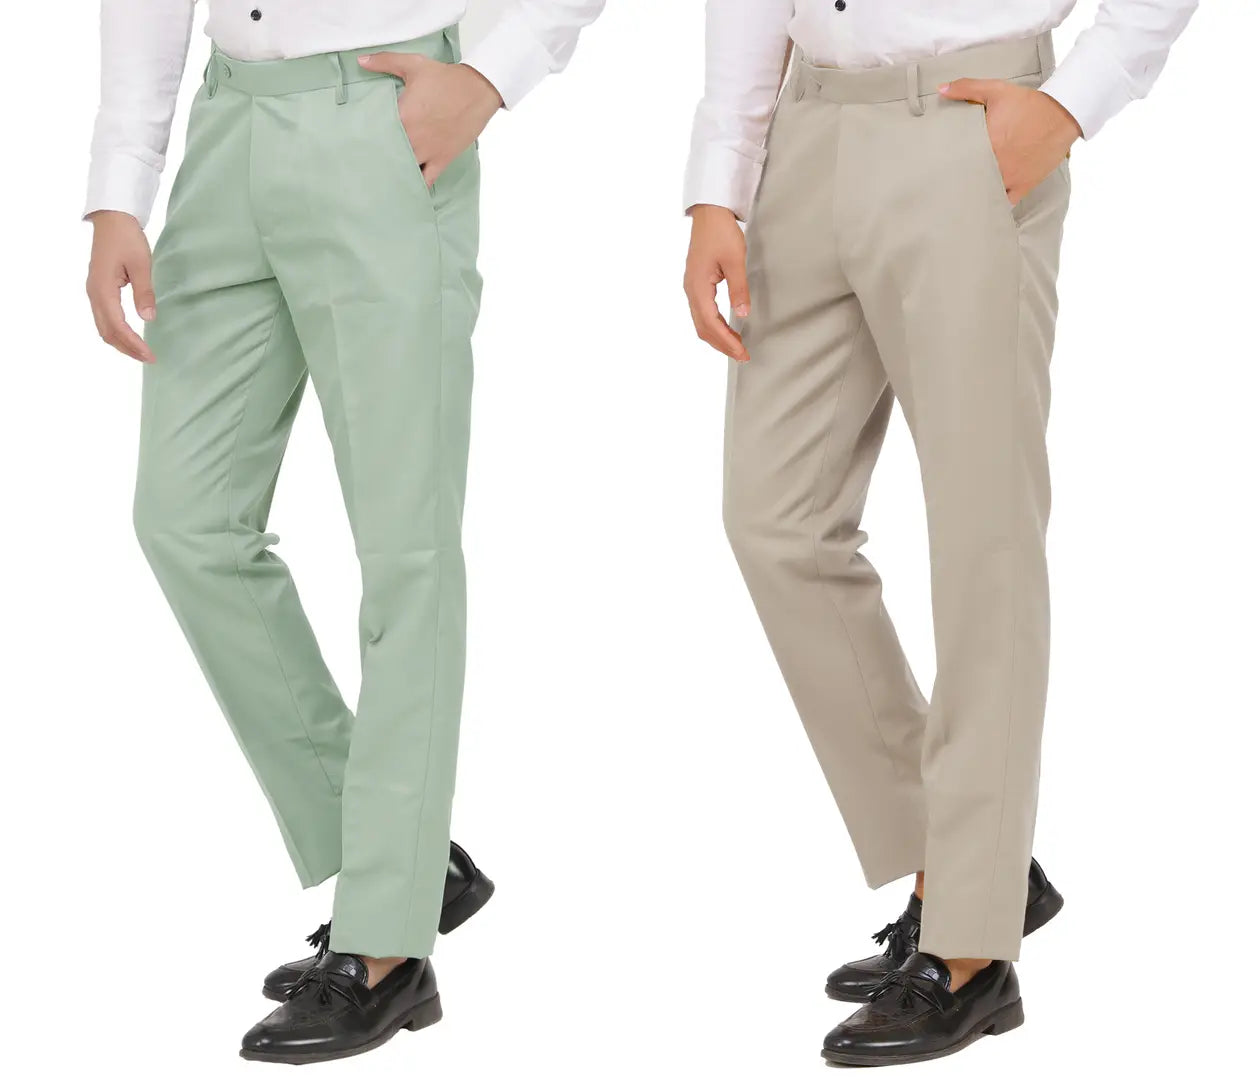 Kundan Men Poly-Viscose Blended Olive Green and Light Cot Brown Formal Trousers ( Pack of 2 Trousers )